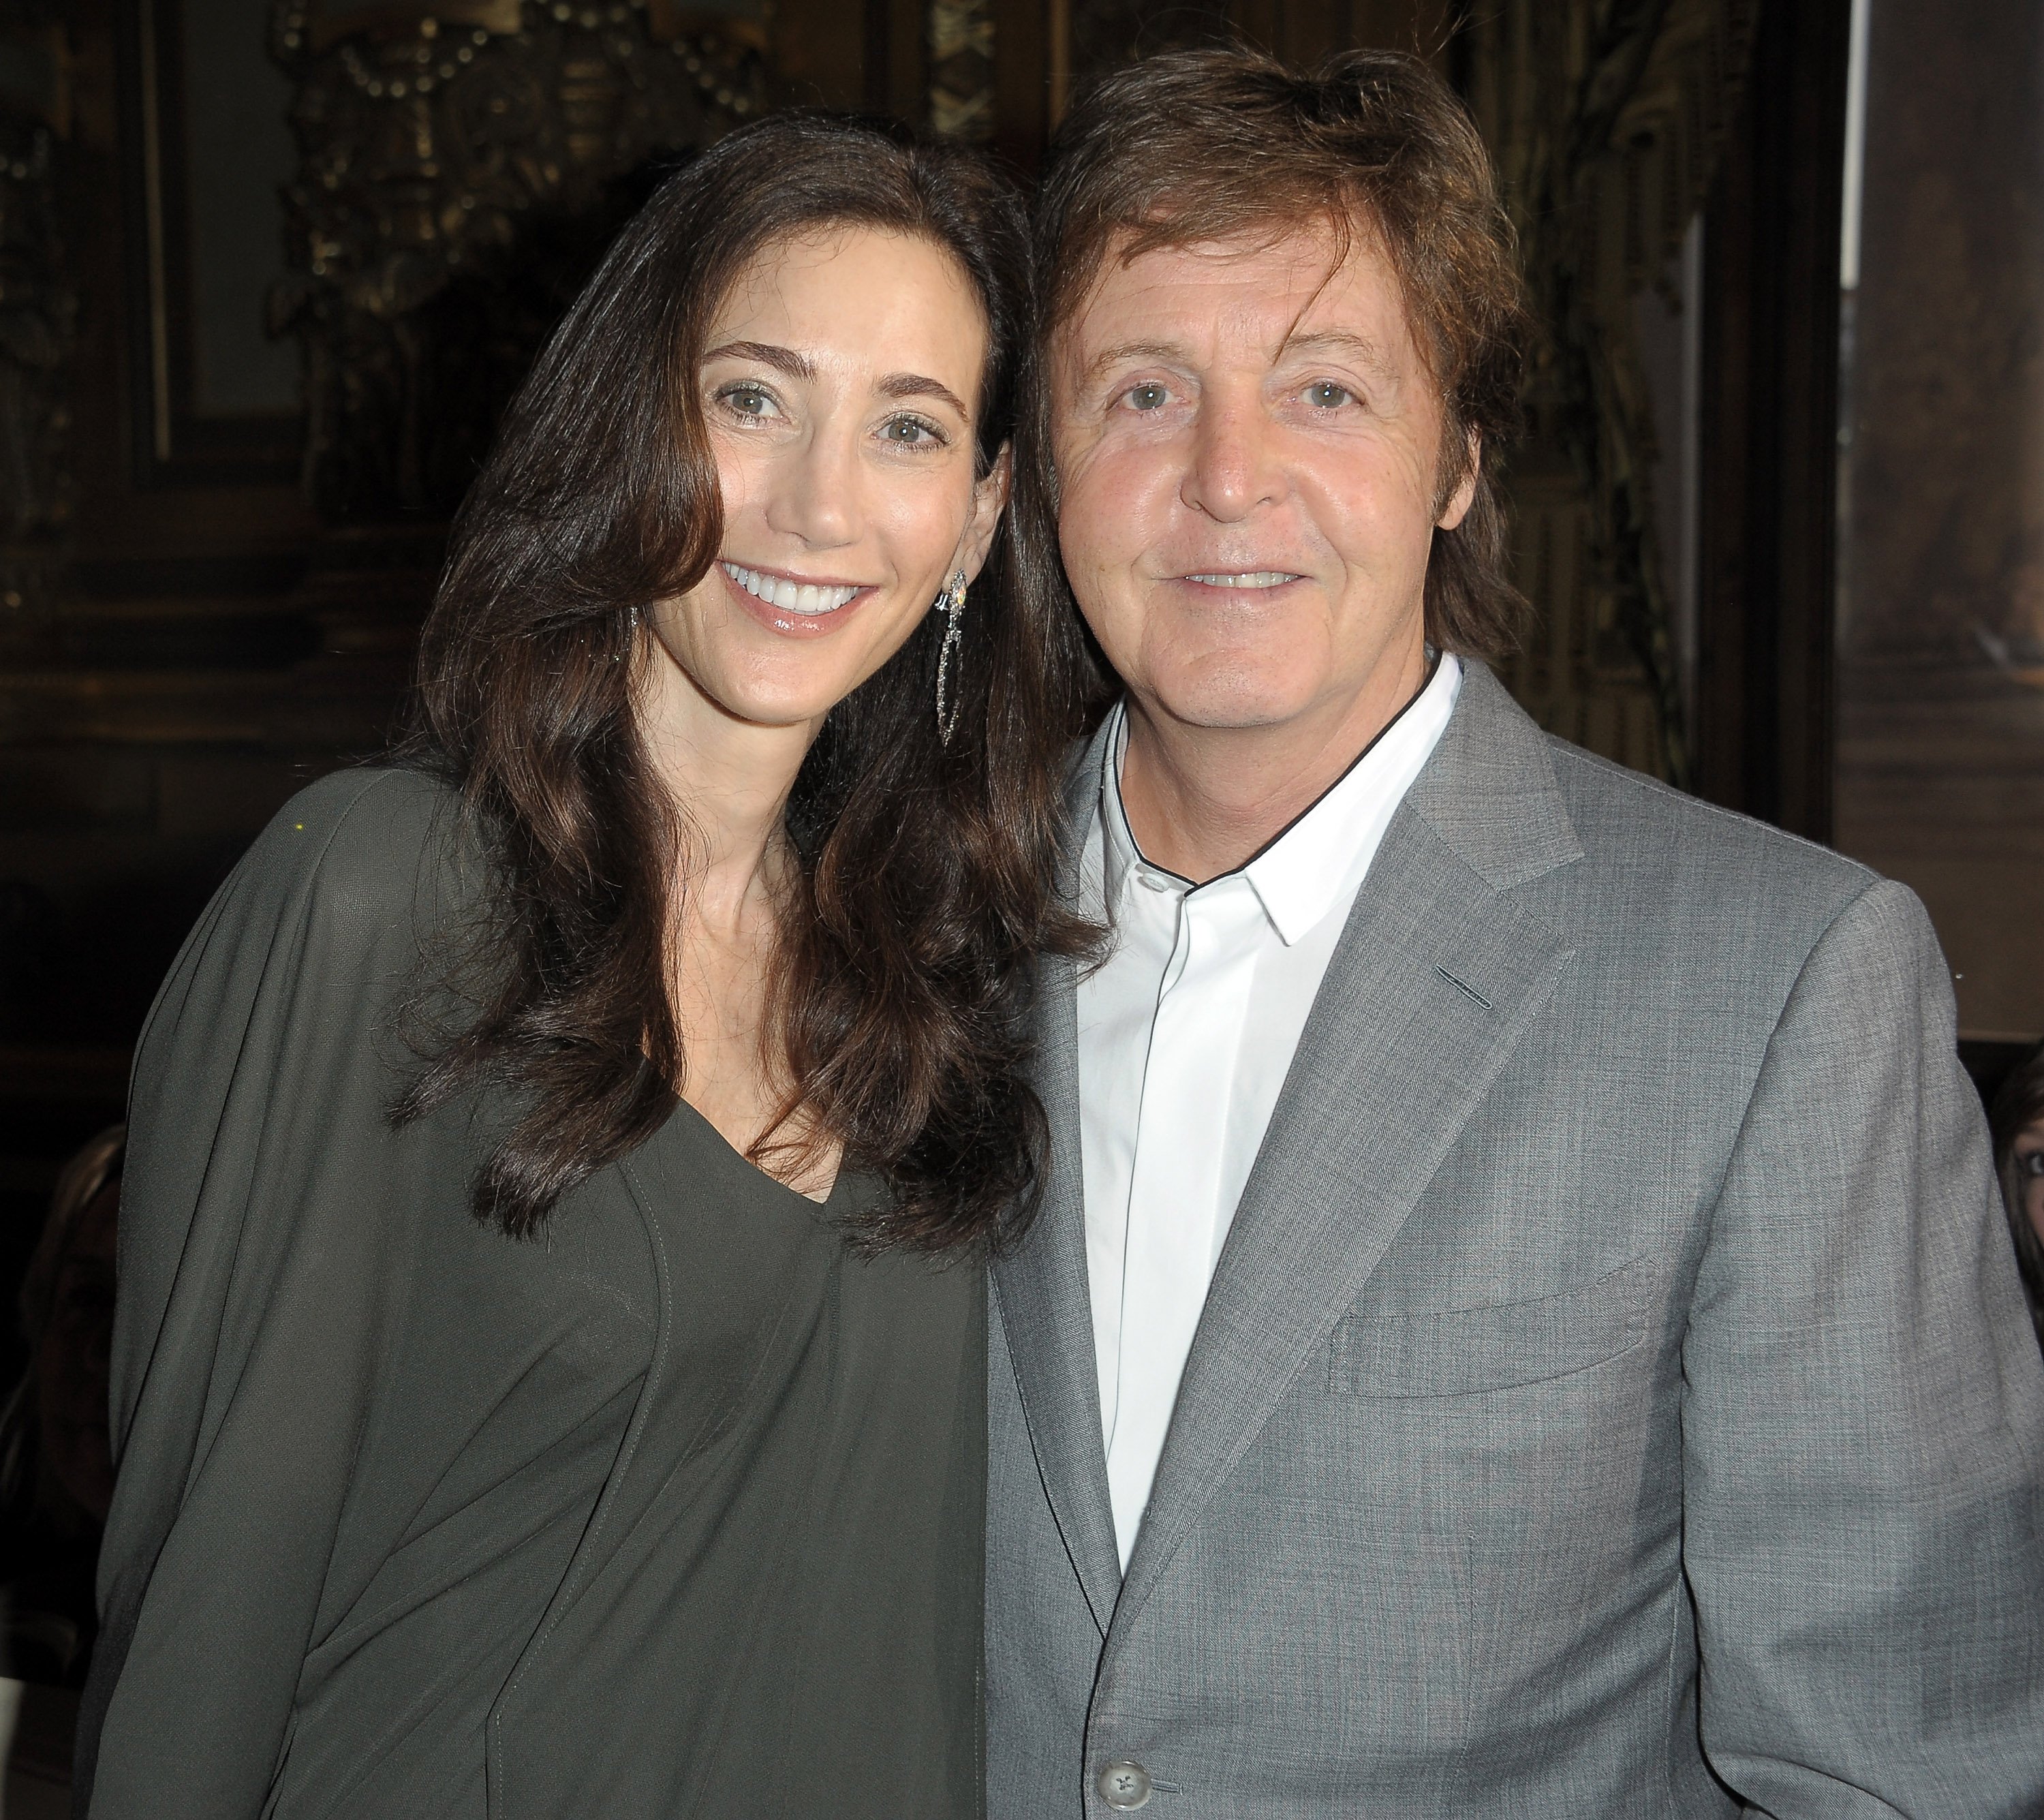 Nancy Shevell and Paul McCartney at the Stella McCartney Ready to Wear Spring/Summer show during Paris Fashion Week on October 4, 2010, in Paris, France | Source: Getty Images